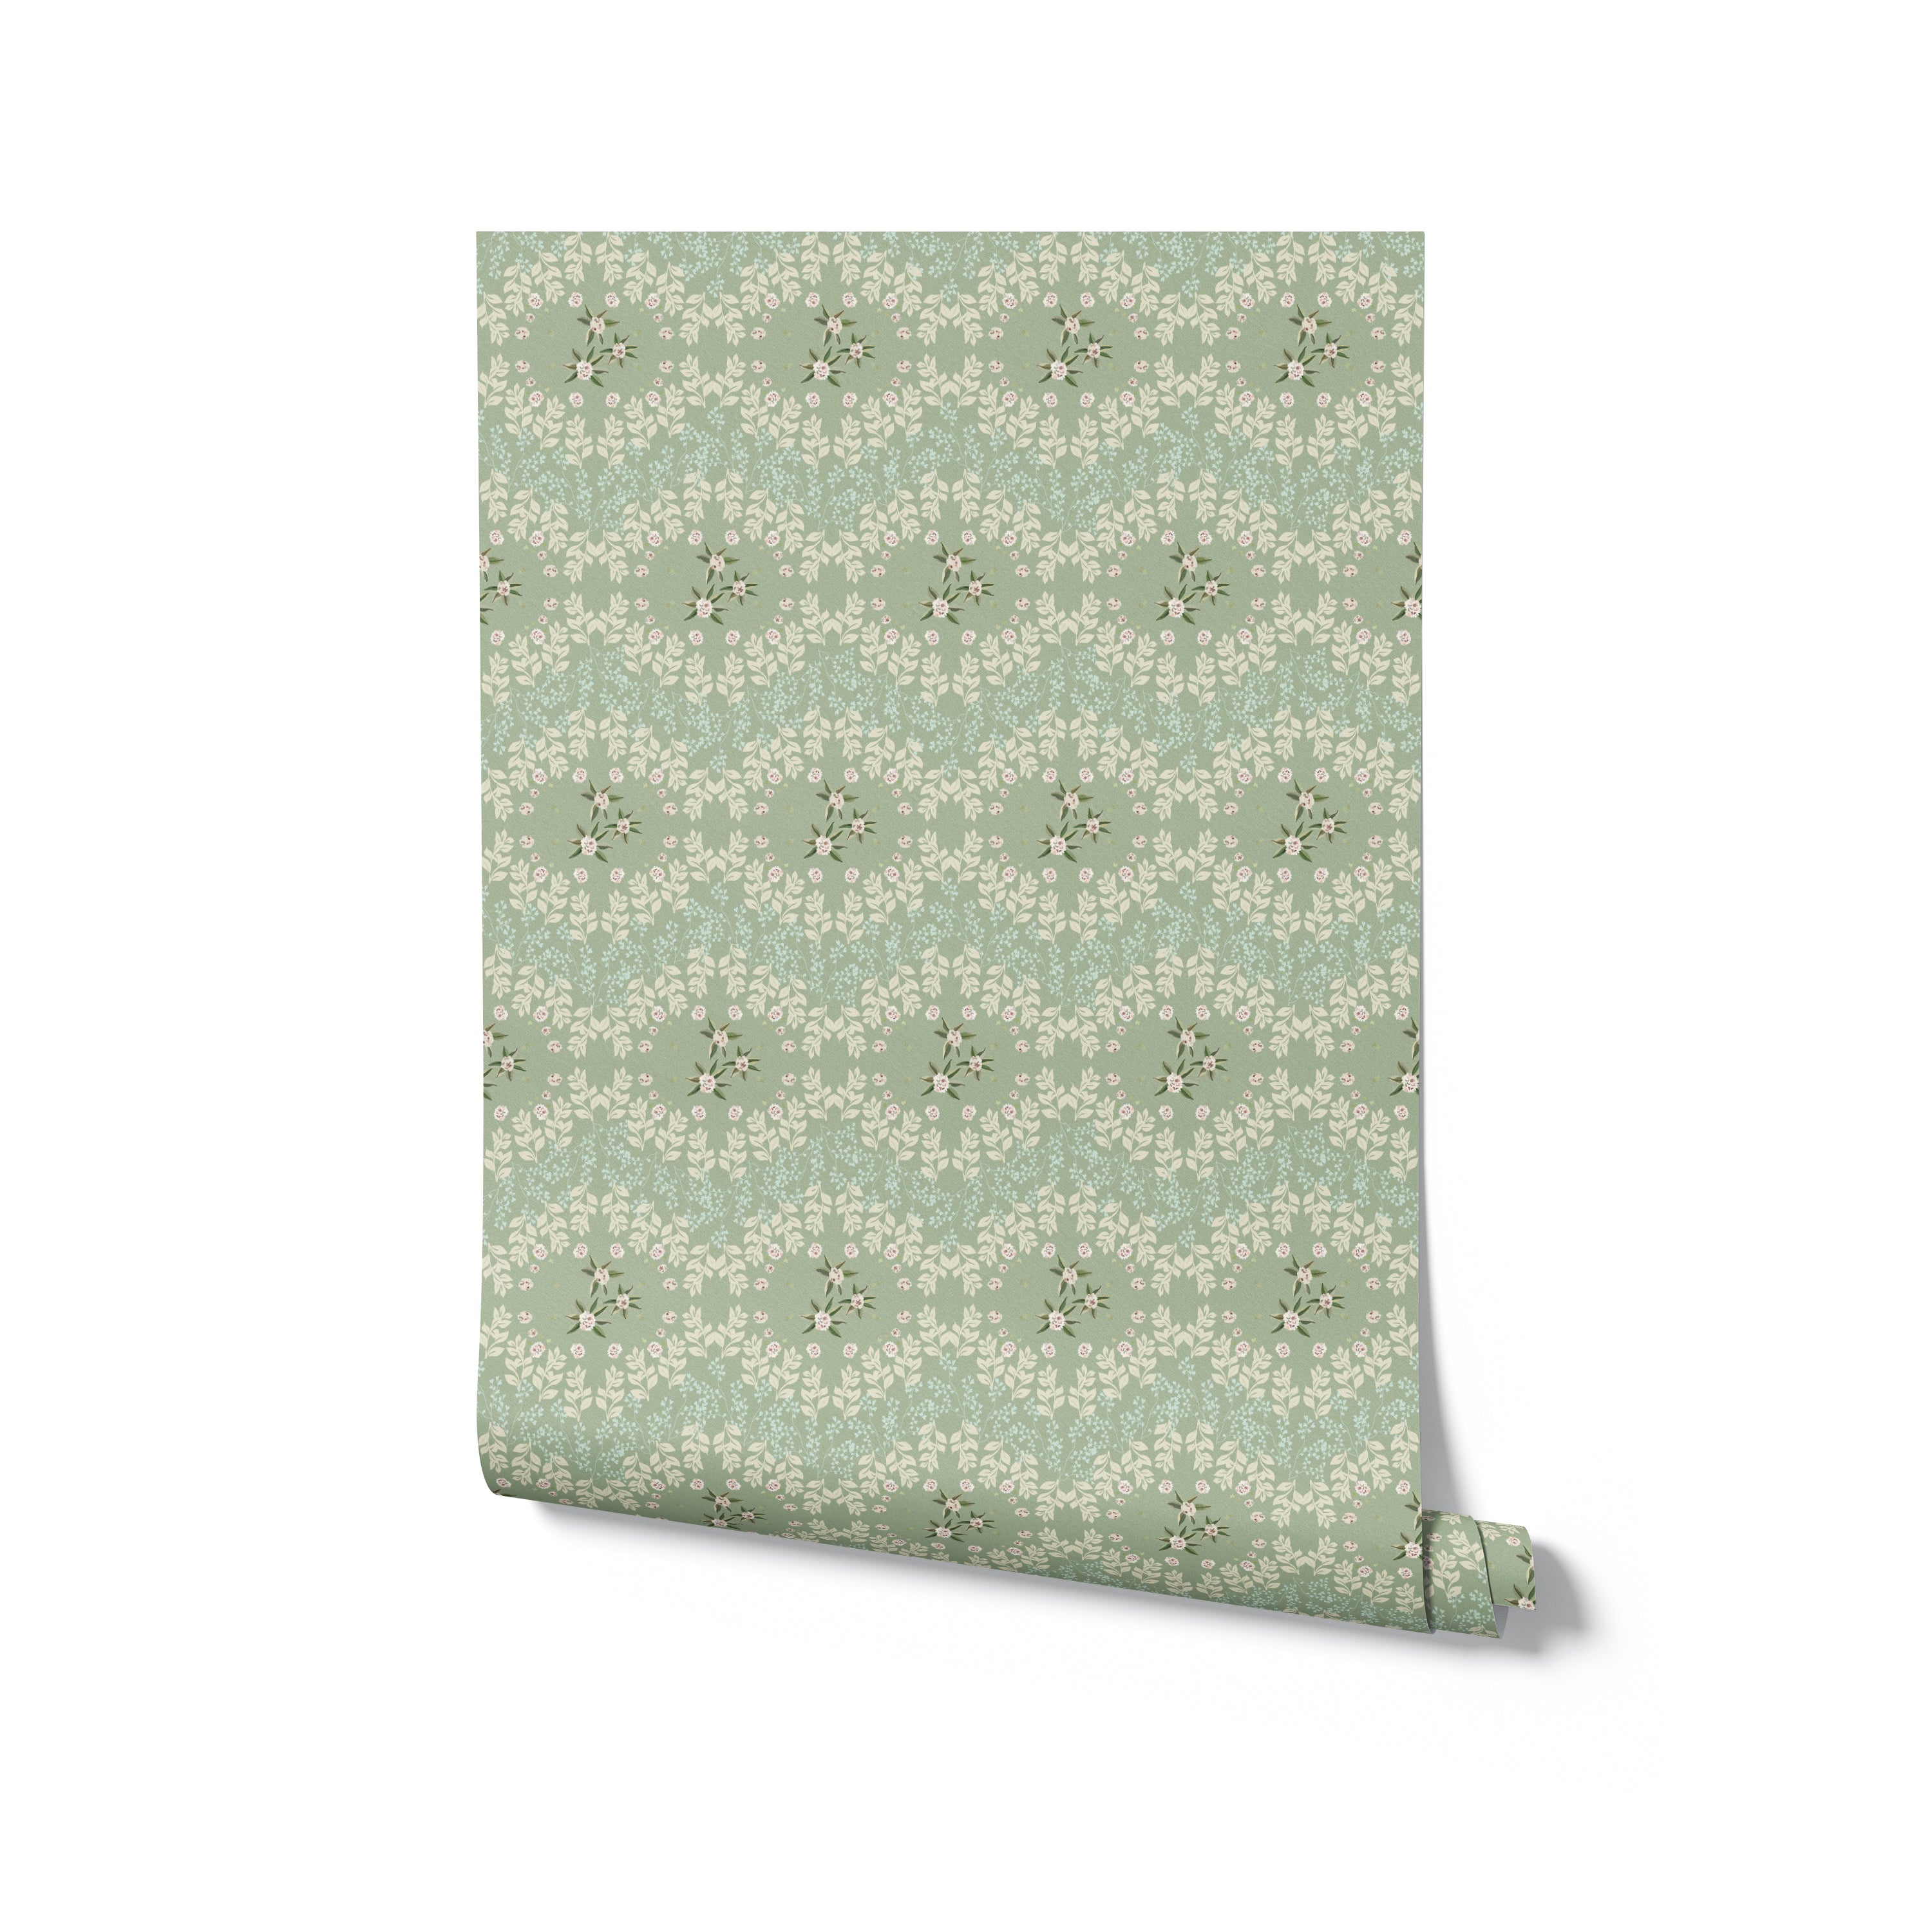 A roll of Heritage Blooms Wallpaper, displaying a beautiful floral pattern in soft green with white and pink accents. This elegant wallpaper brings a timeless and classic feel to any room, ideal for creating a warm and inviting environment